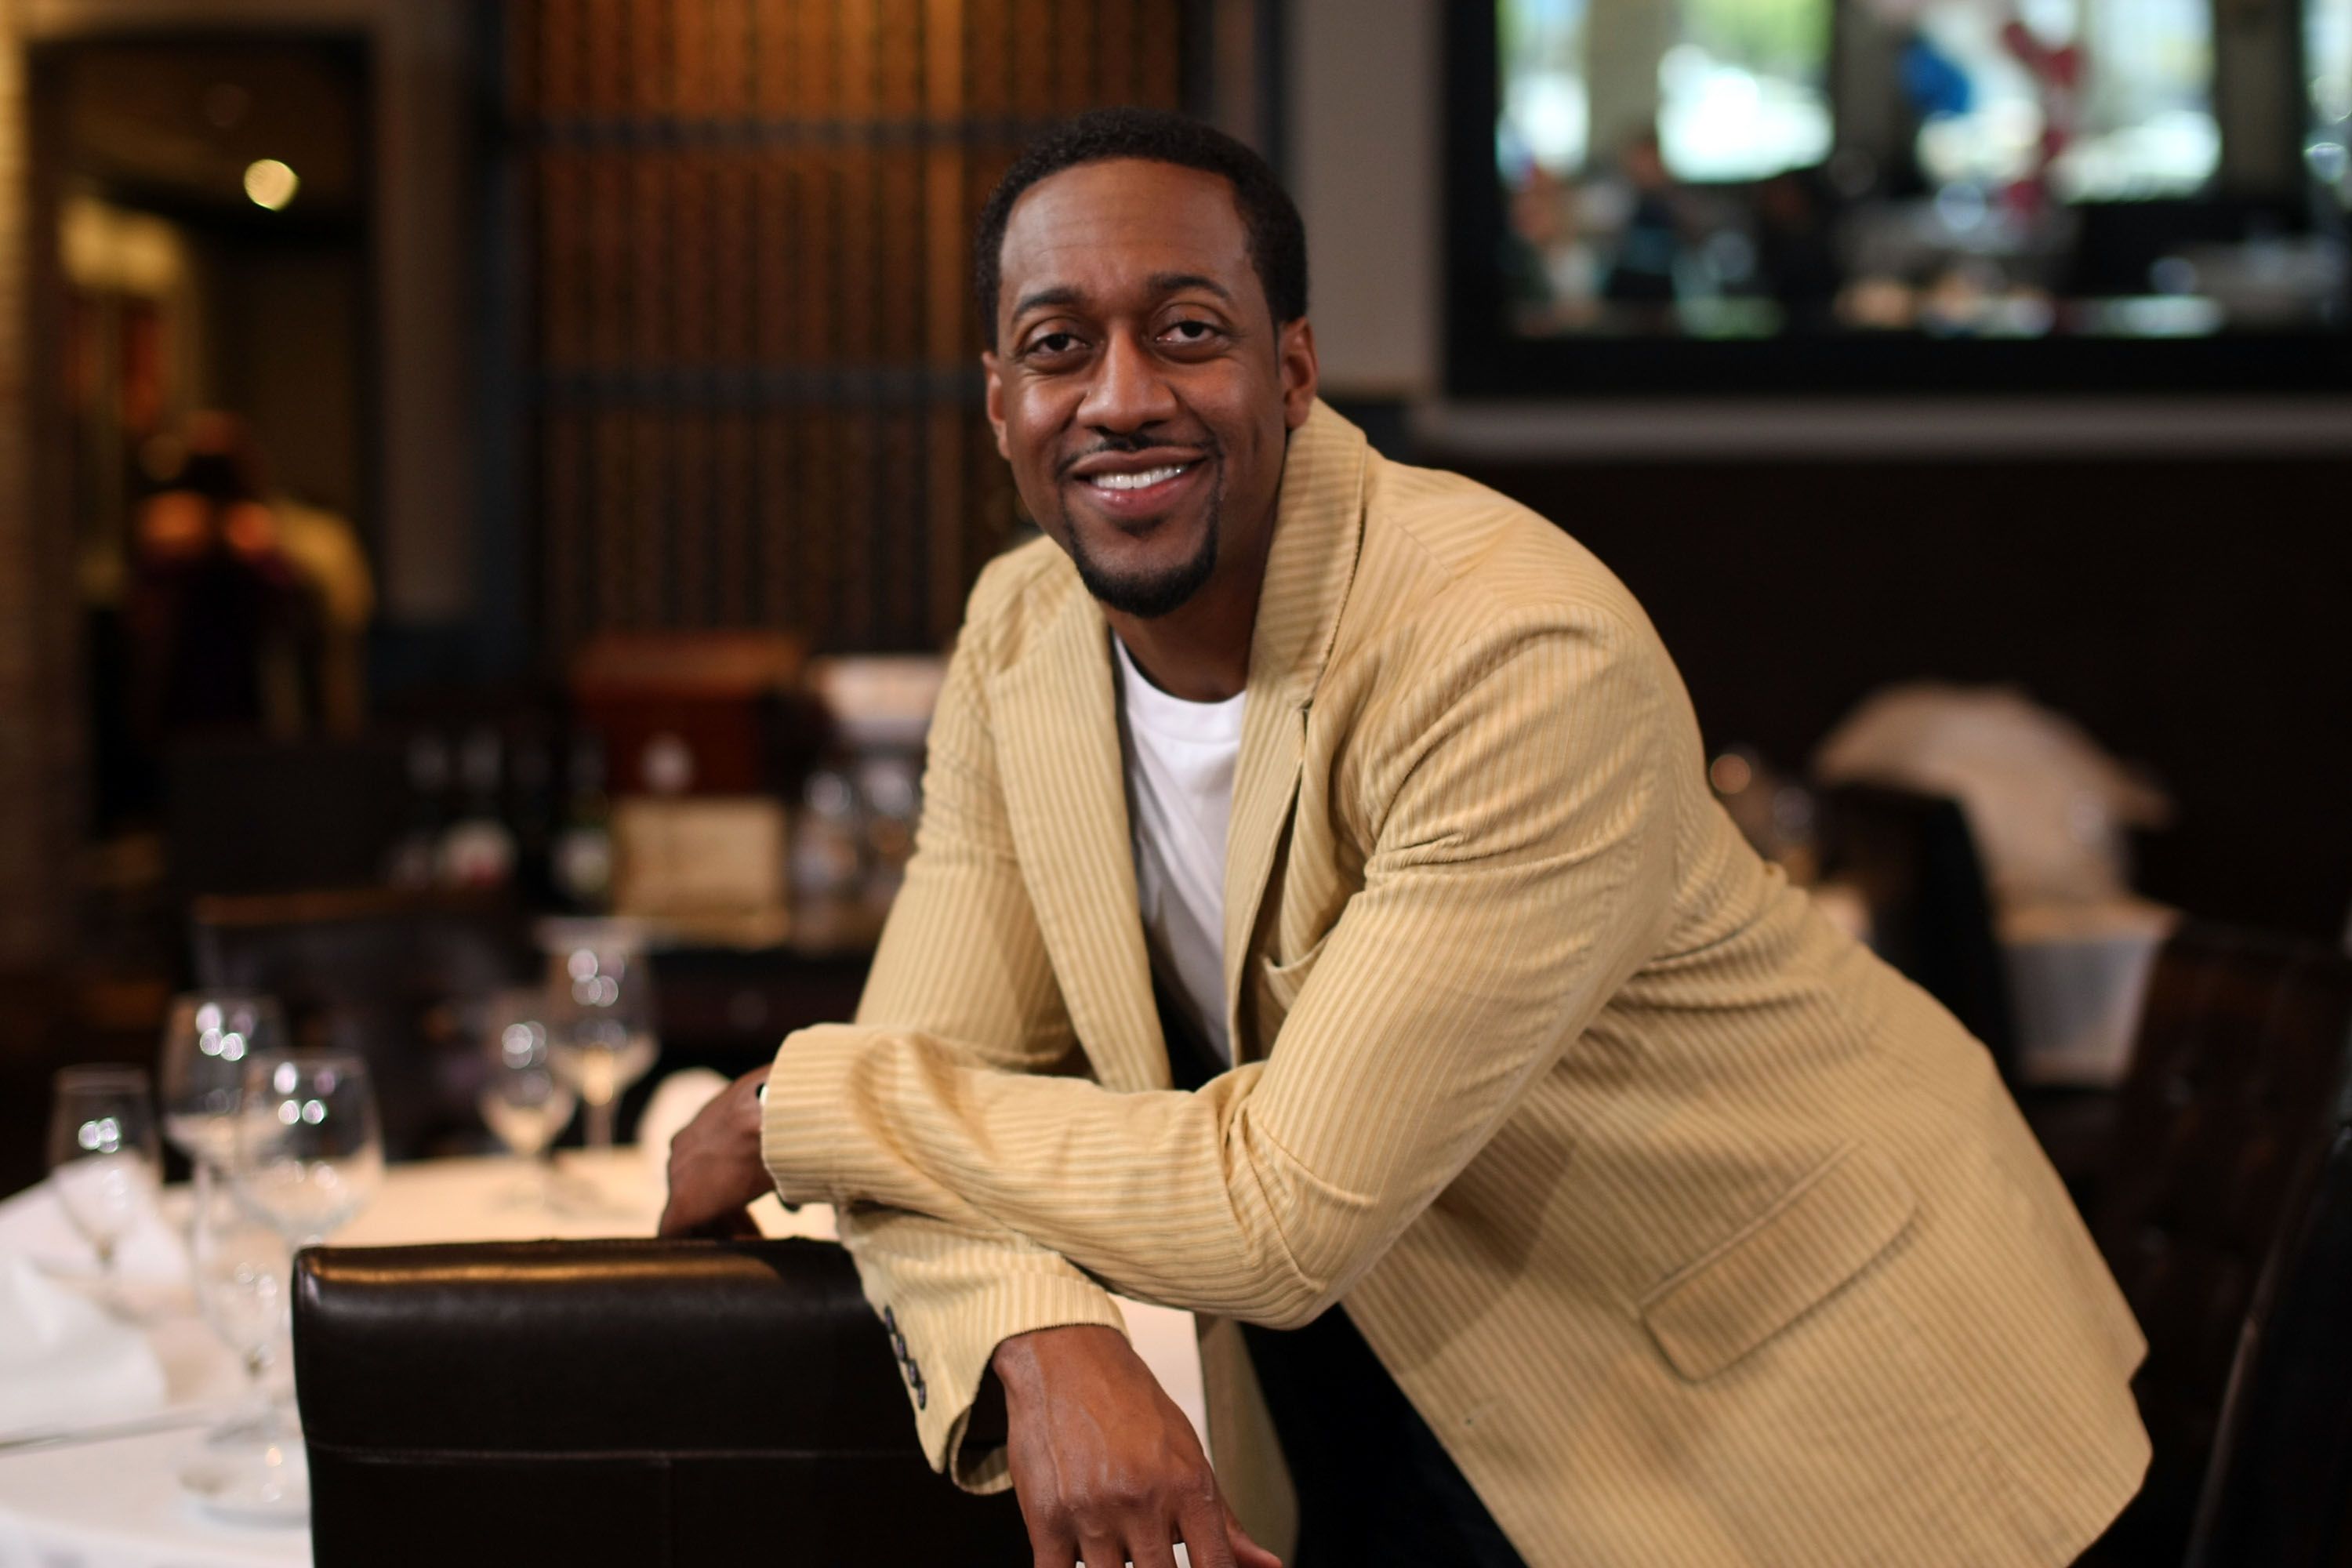 Jaleel White on the set of "Road To The Altar" in April 2009 in Encino, California | Source: Getty Images